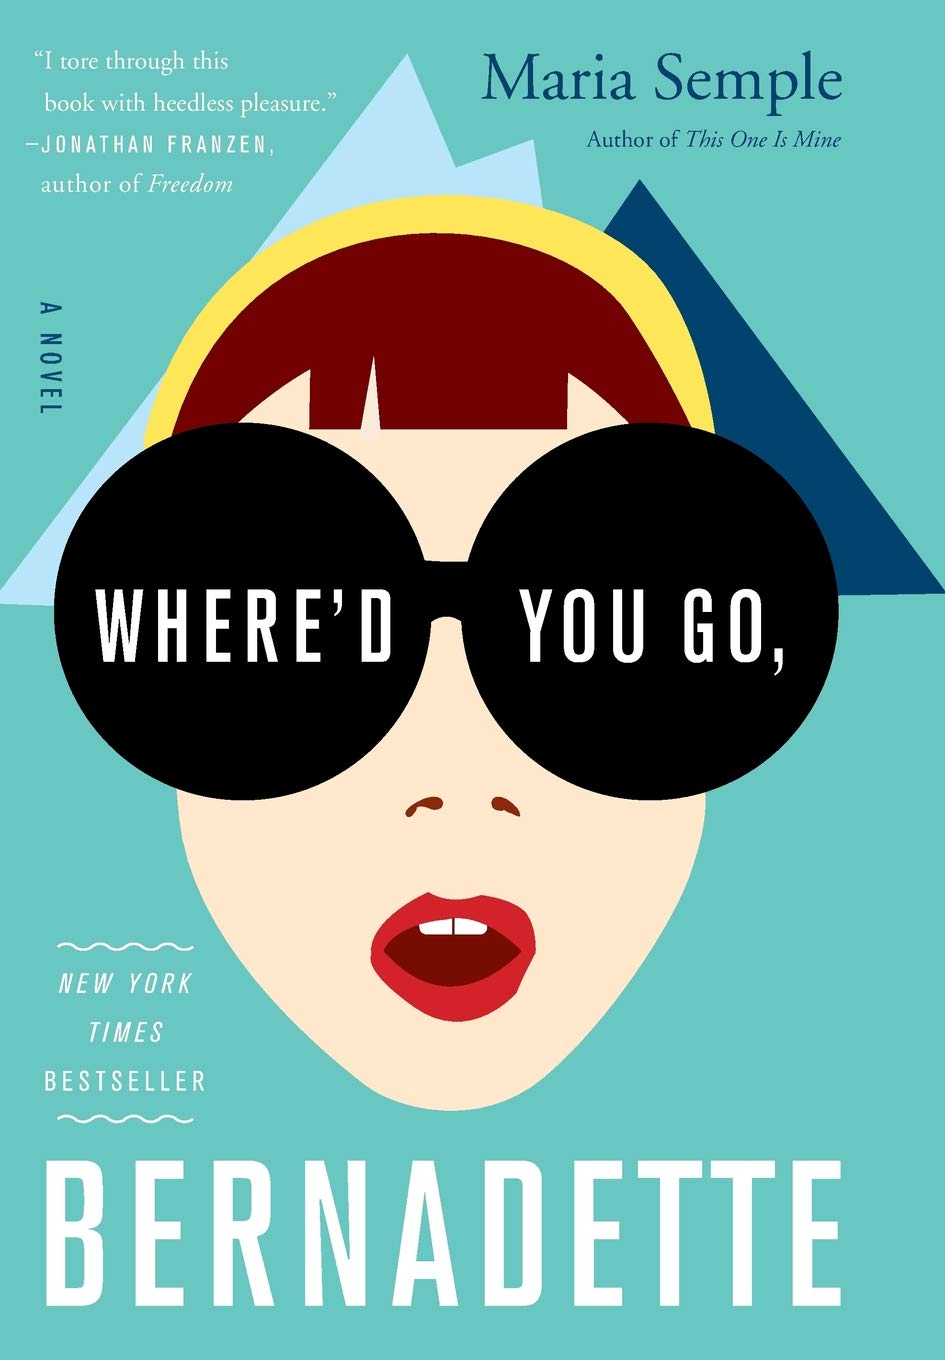 Book cover of "Where’d You Go, Bernadette?" by Maria Semple